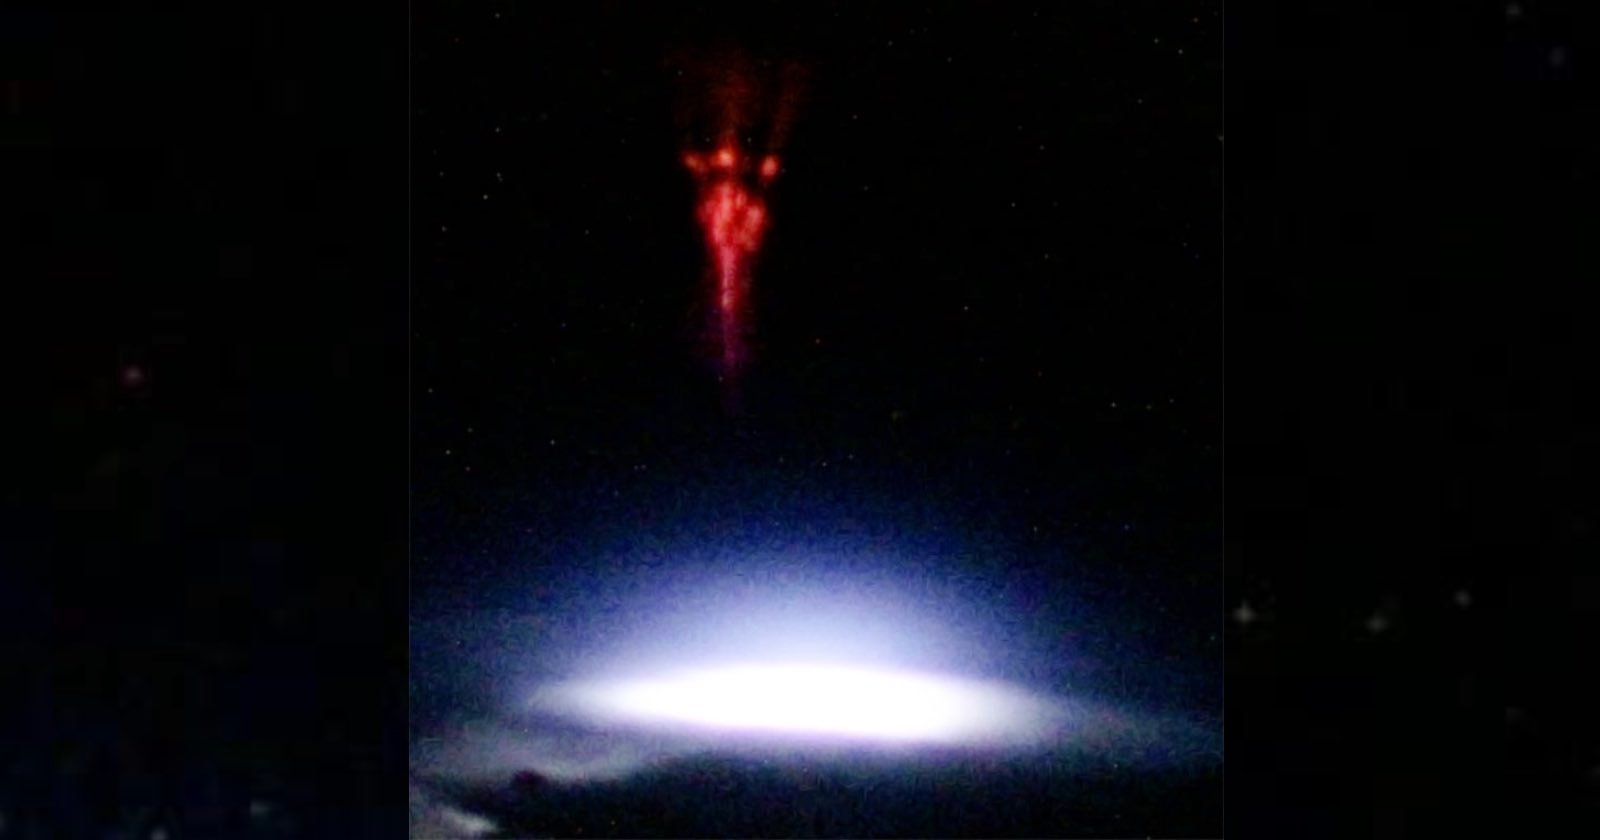 Astronaut Captures Image of Elusive Red Sprite High Above The Earth